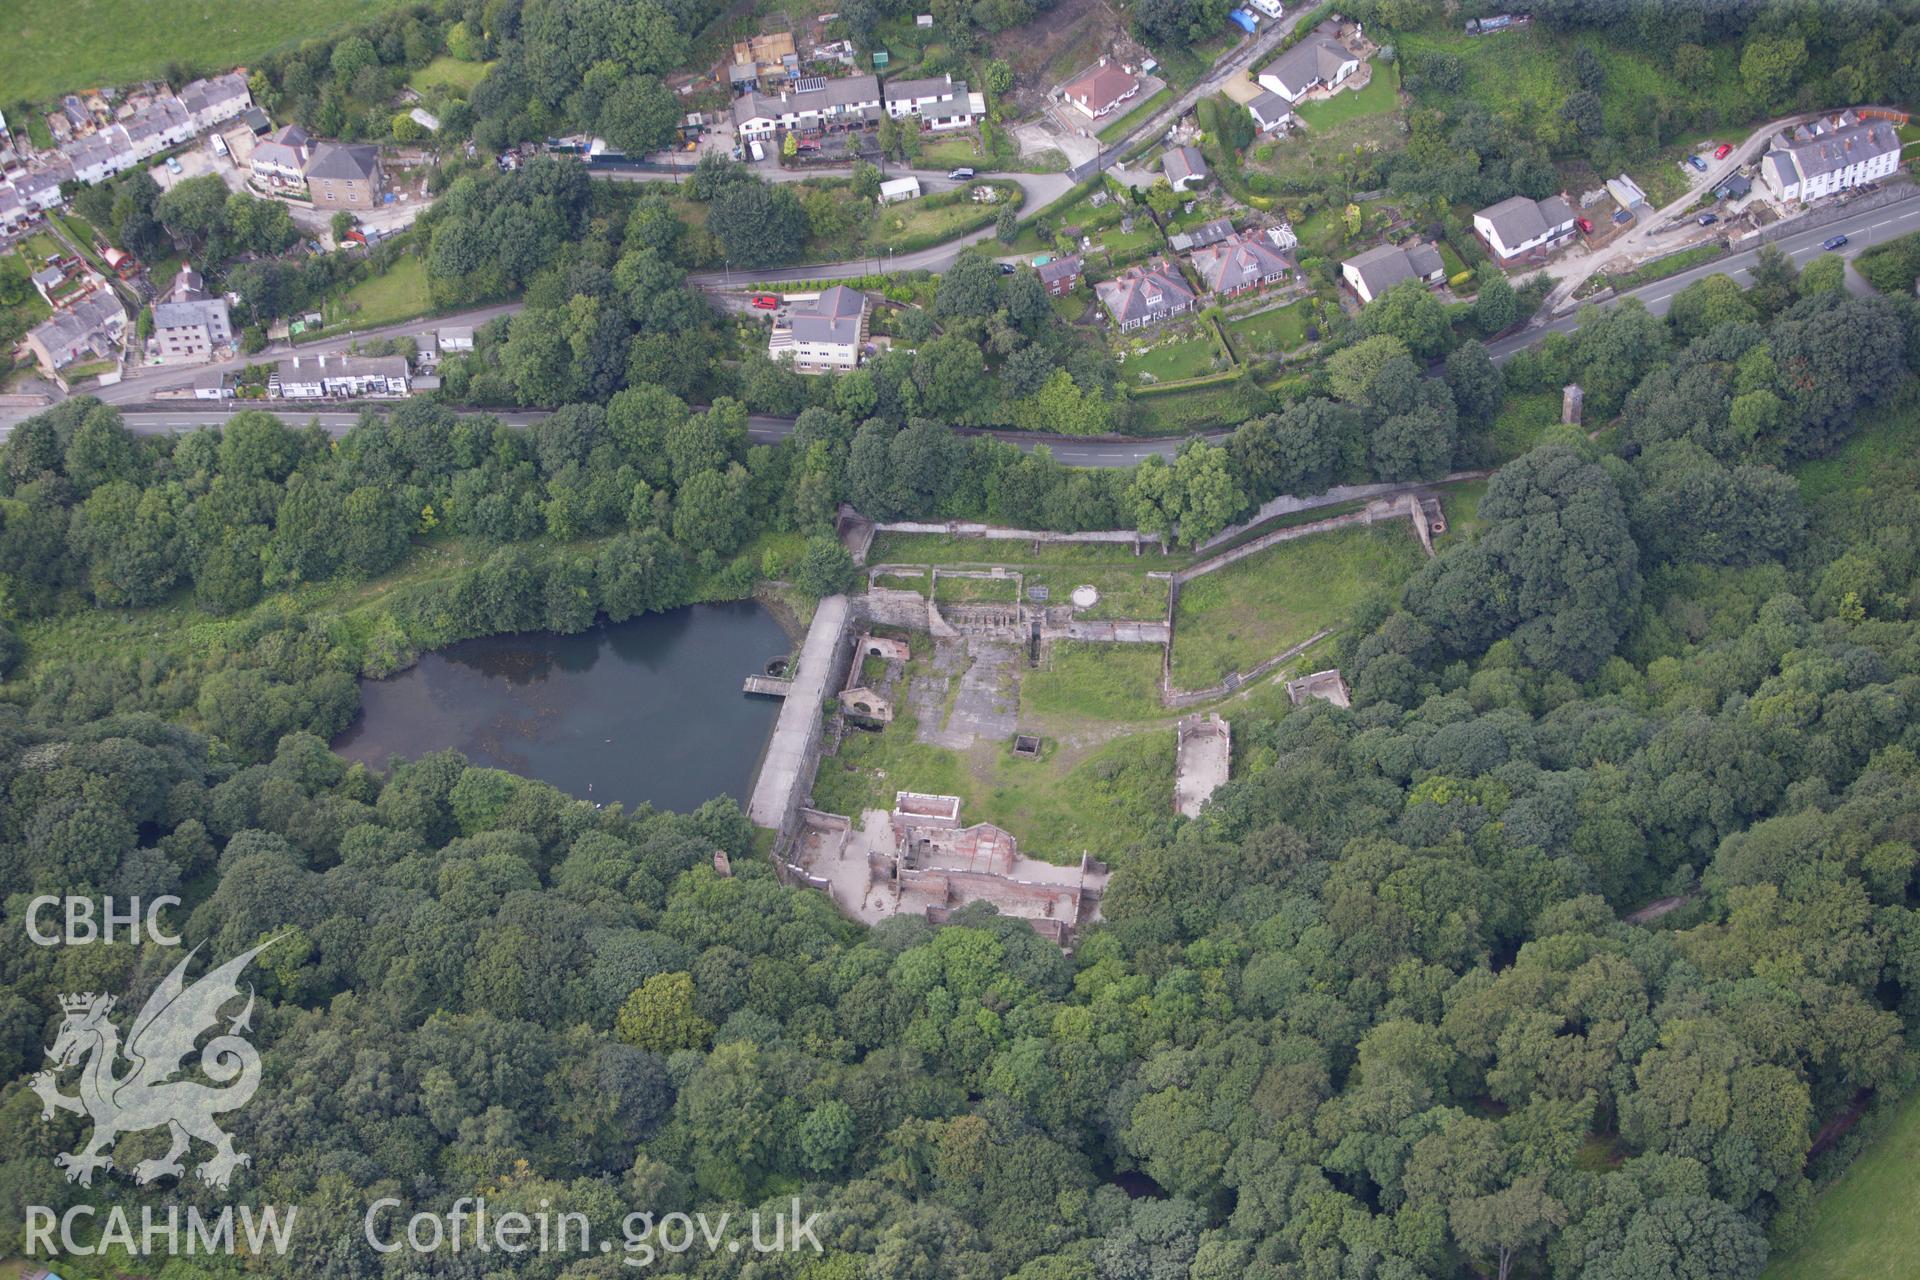 RCAHMW colour oblique aerial photograph of Greenfield Valley Mills, Holywell. Taken on 30 July 2009 by Toby Driver